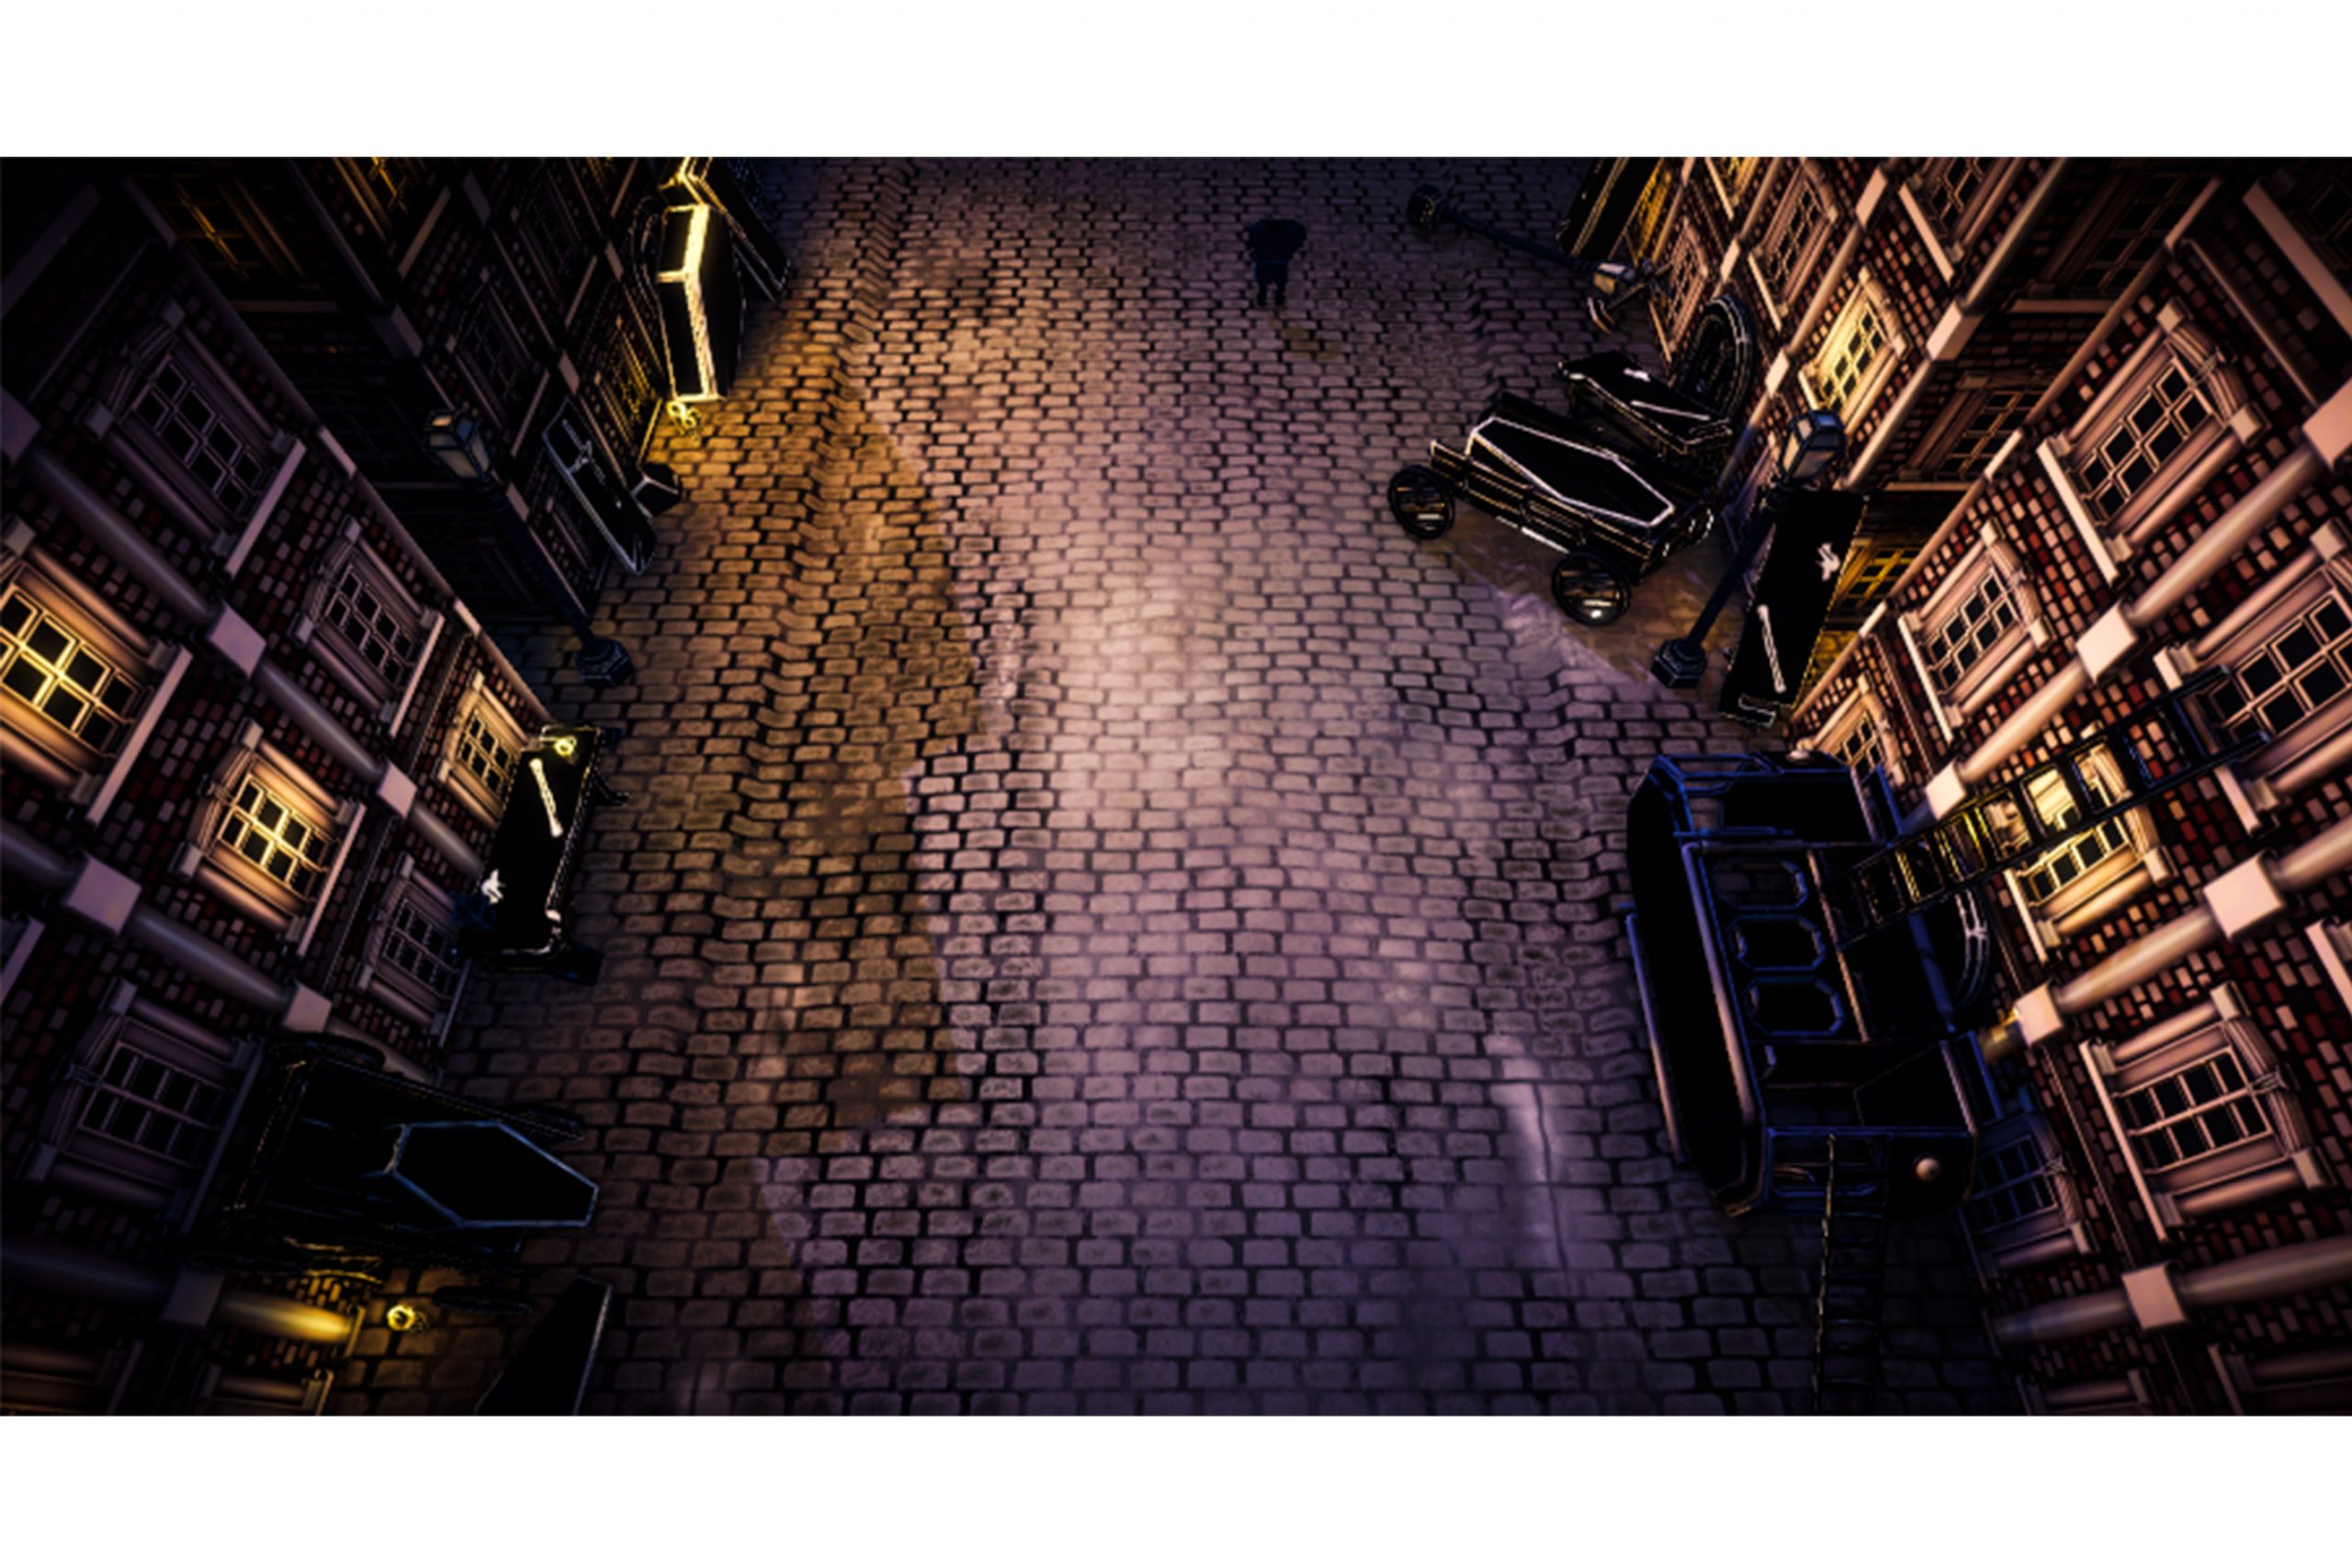 A screenshot from the game "Off with your head!" by Clown Town. The image shows a top down view of a dark and sinister looking street at night time.